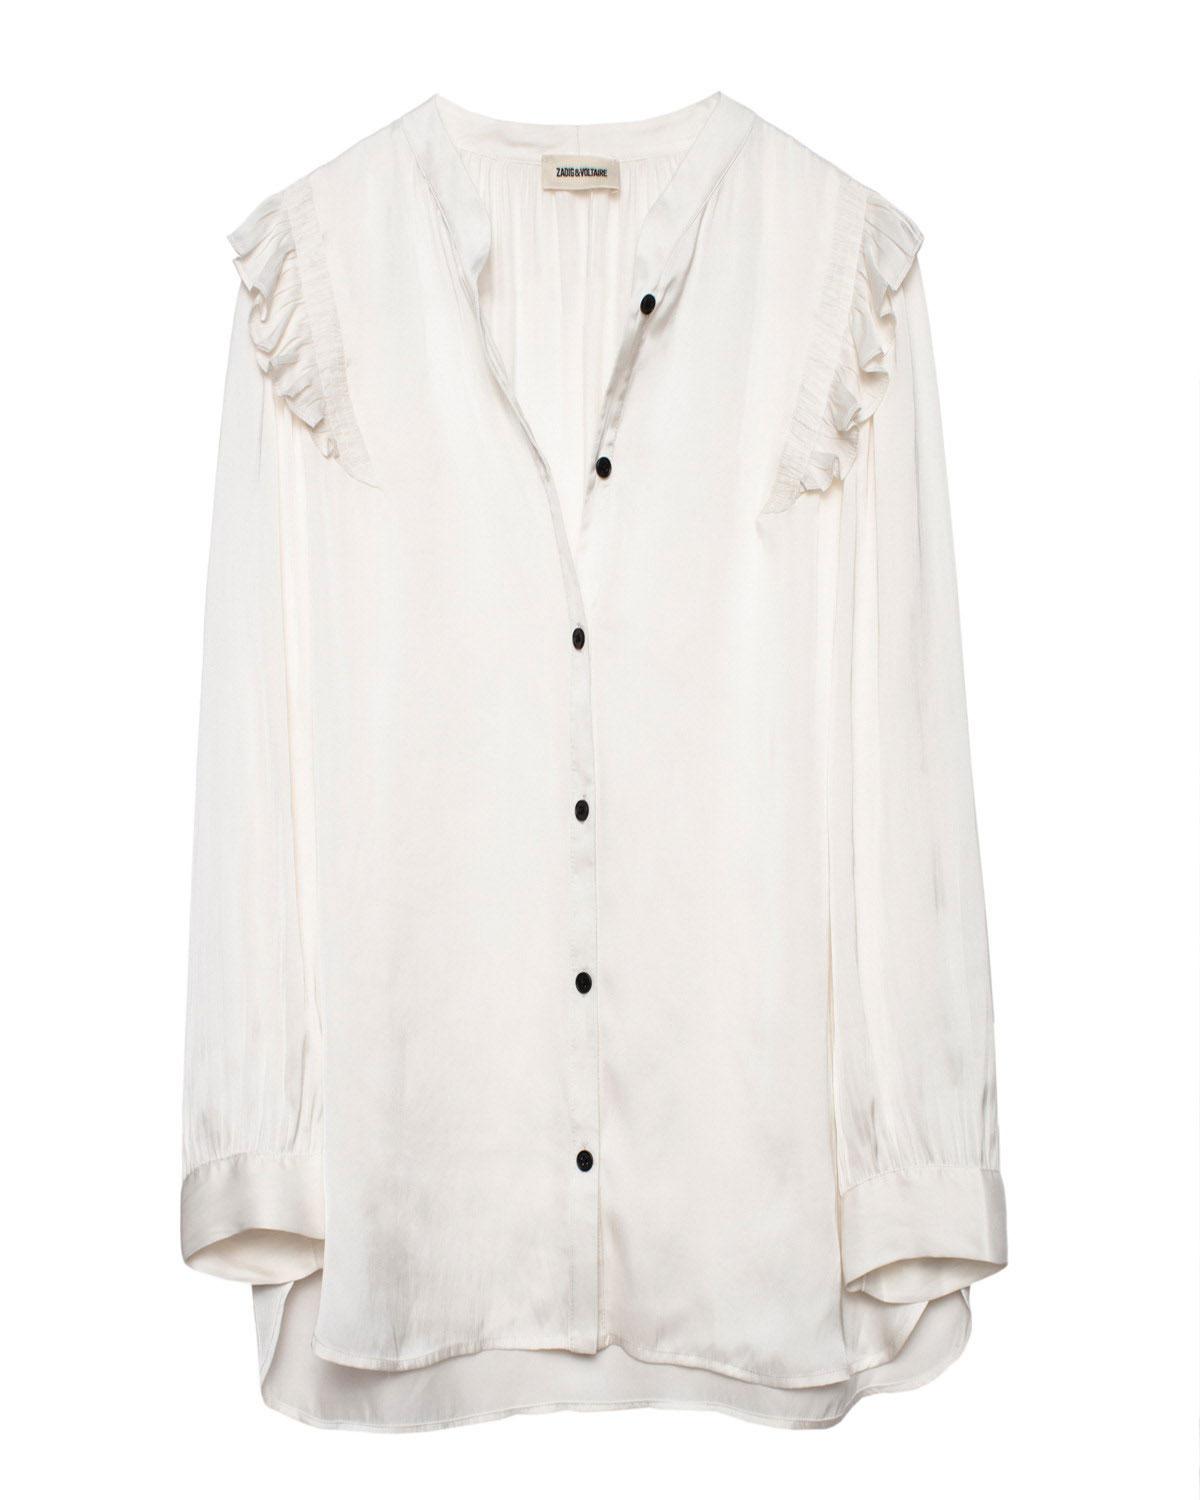 Zadig & Voltaire Tygg Satin Button-down Ruffle Top in White - Lyst